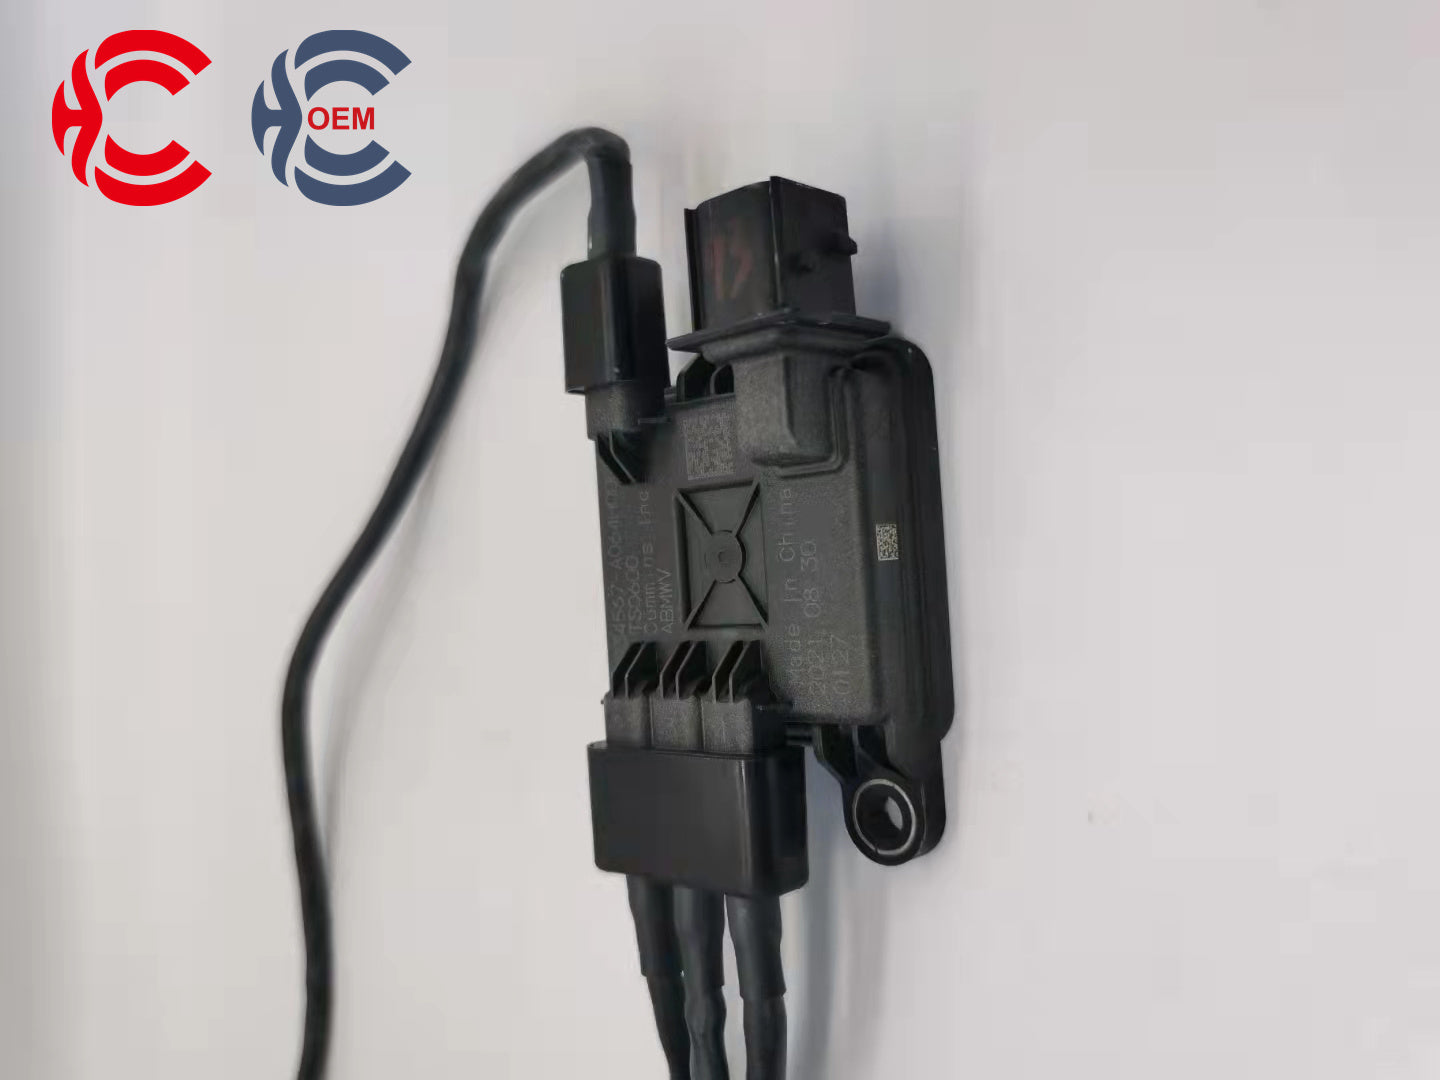 OEM: TS0600 A064H000 CUMMINSMaterial: MetalColor: SilverOrigin: Made in ChinaWeight: 200gPacking List: 1* Exhaust Gas Temperature Sensor More ServiceWe can provide OEM Manufacturing serviceWe can Be your one-step solution for Auto PartsWe can provide technical scheme for you Feel Free to Contact Us, We will get back to you as soon as possible.